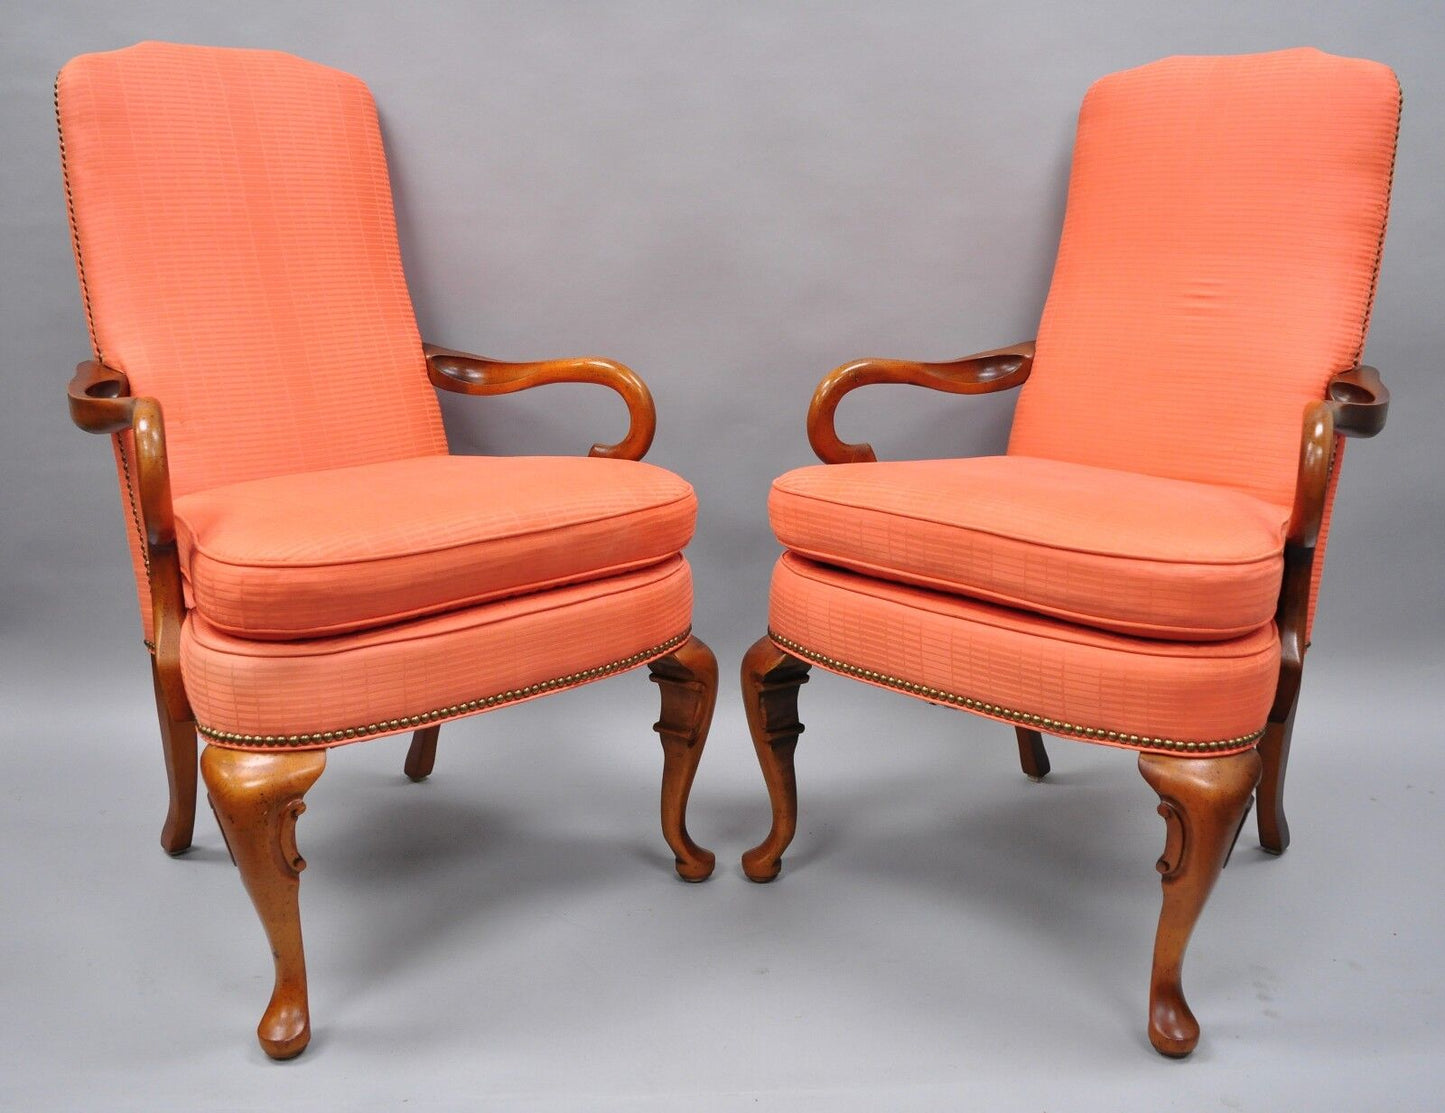 Pair of Queen Anne Office Living Room Cherry Arm Chairs Shaker Heights Chalfont